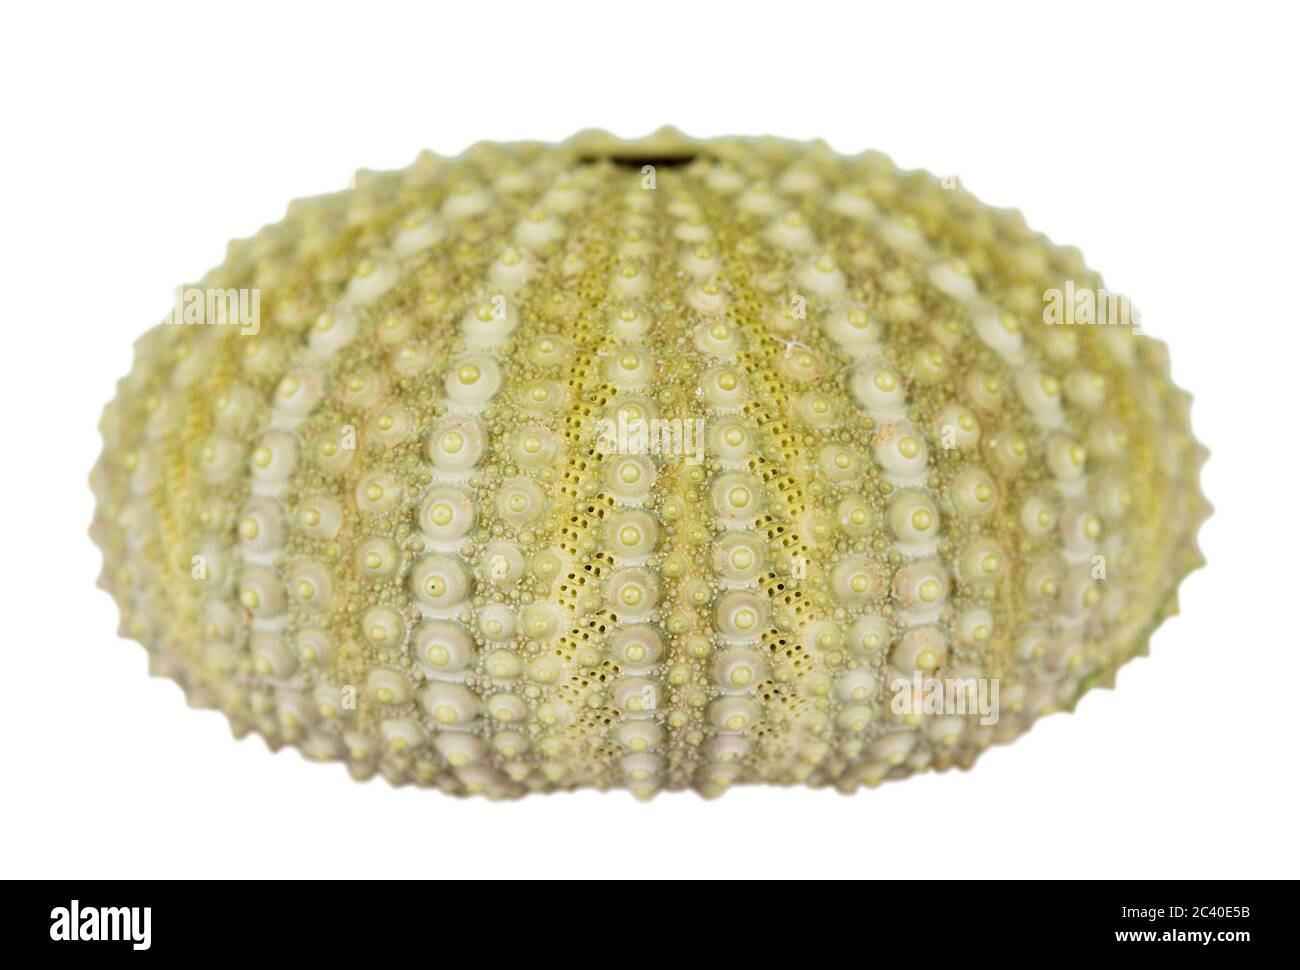 Sea urchin shell isolated on white background. Stock Photo